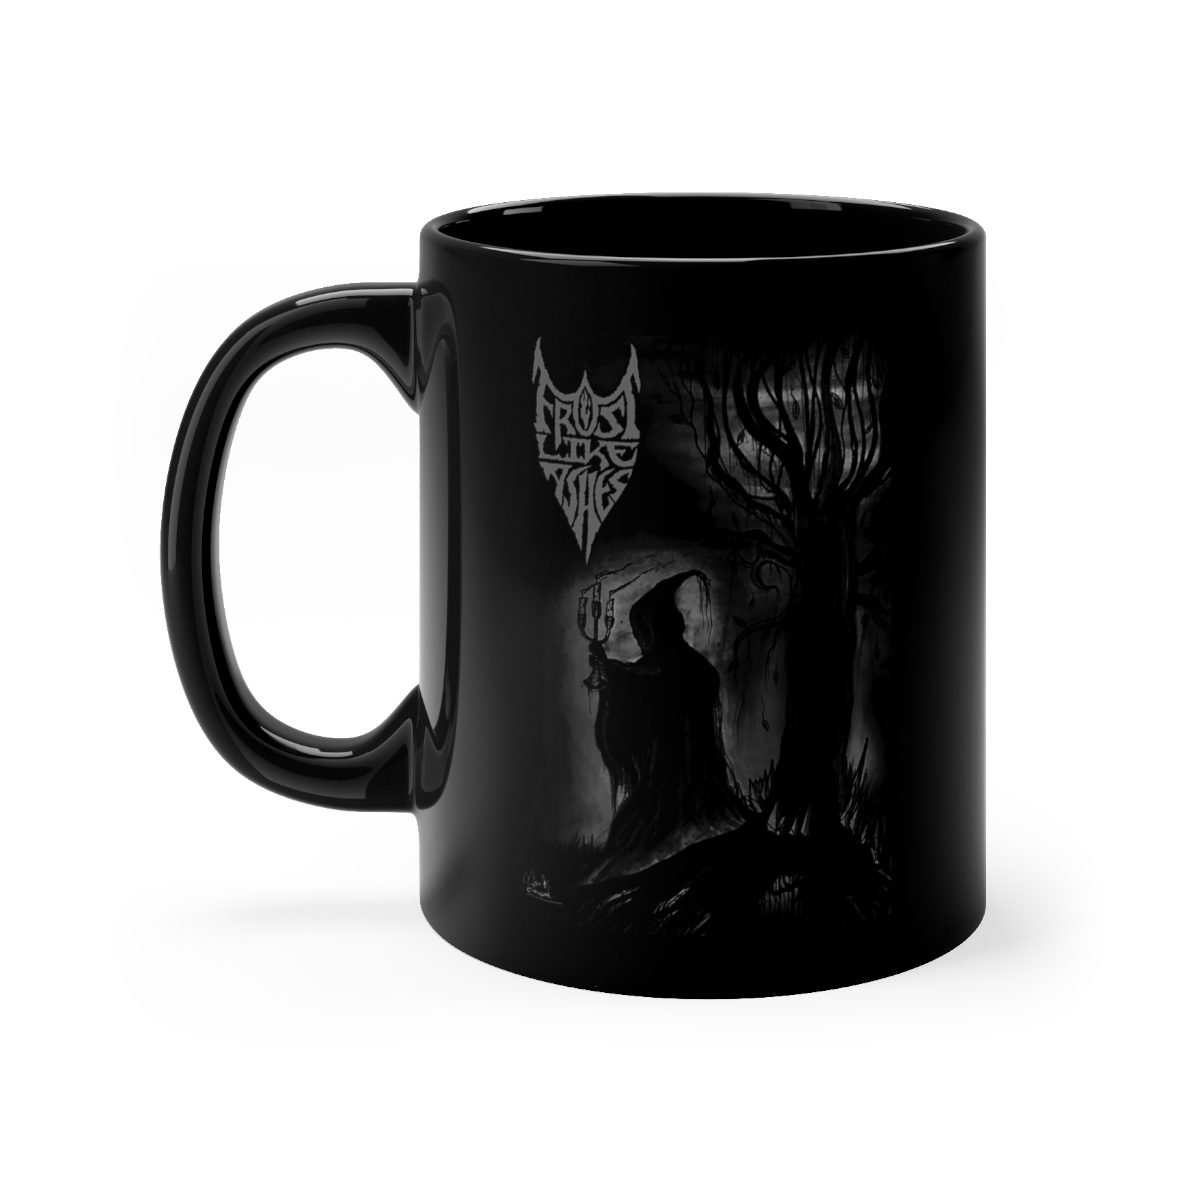 Frost Like Ashes Lord of Darkness Black mug 11oz